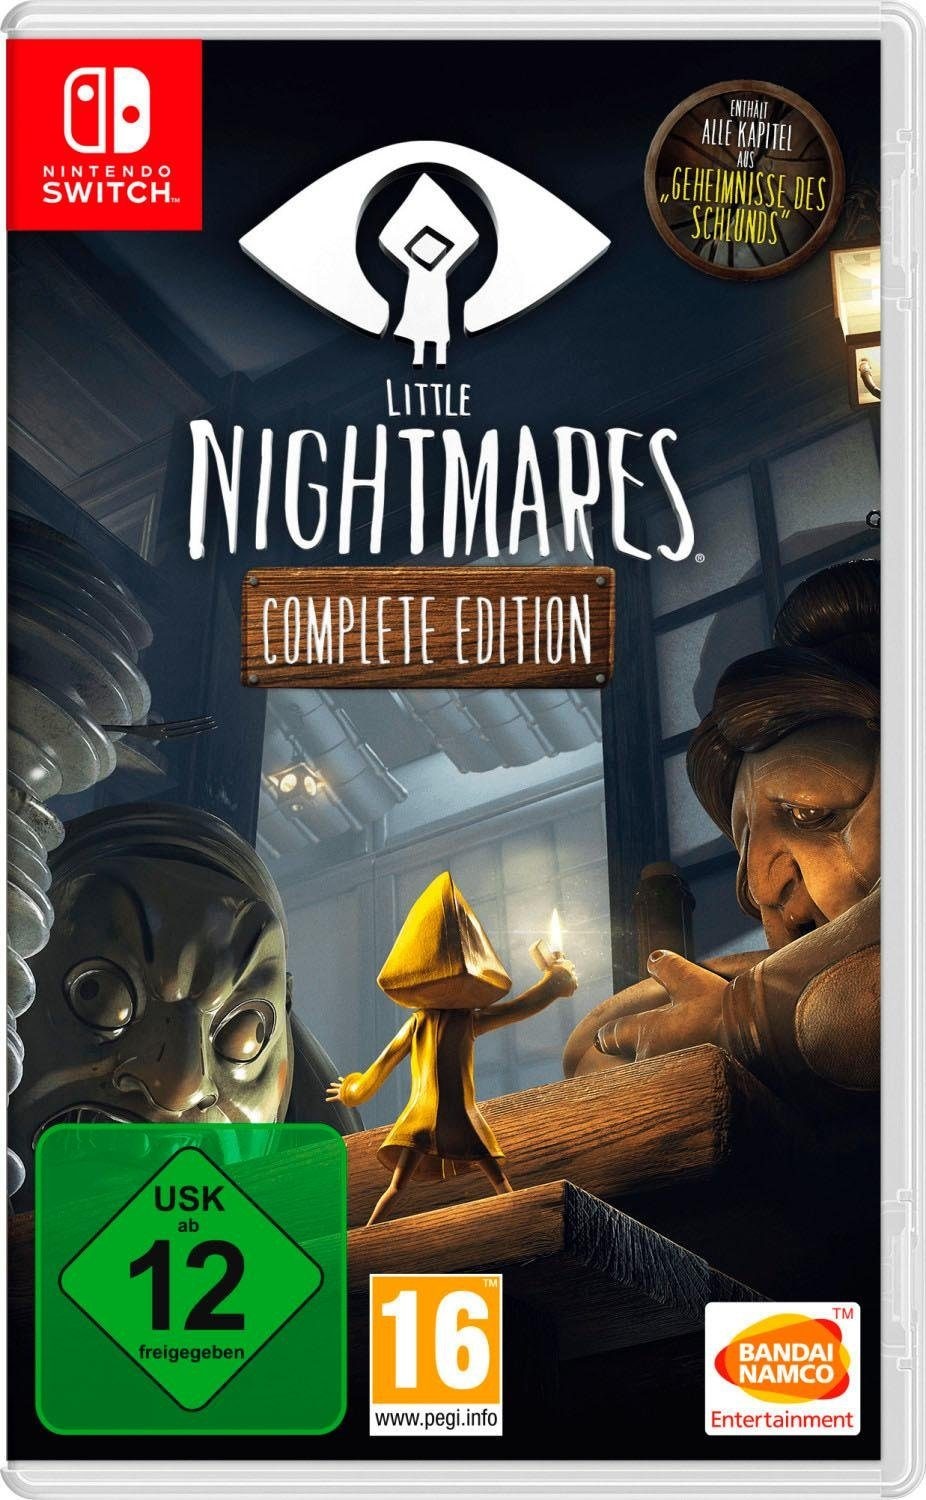 Spielesoftware »LITTLE NIGHTMARES COMPLETE EDITION«, Nintendo Switch, Software Pyramide